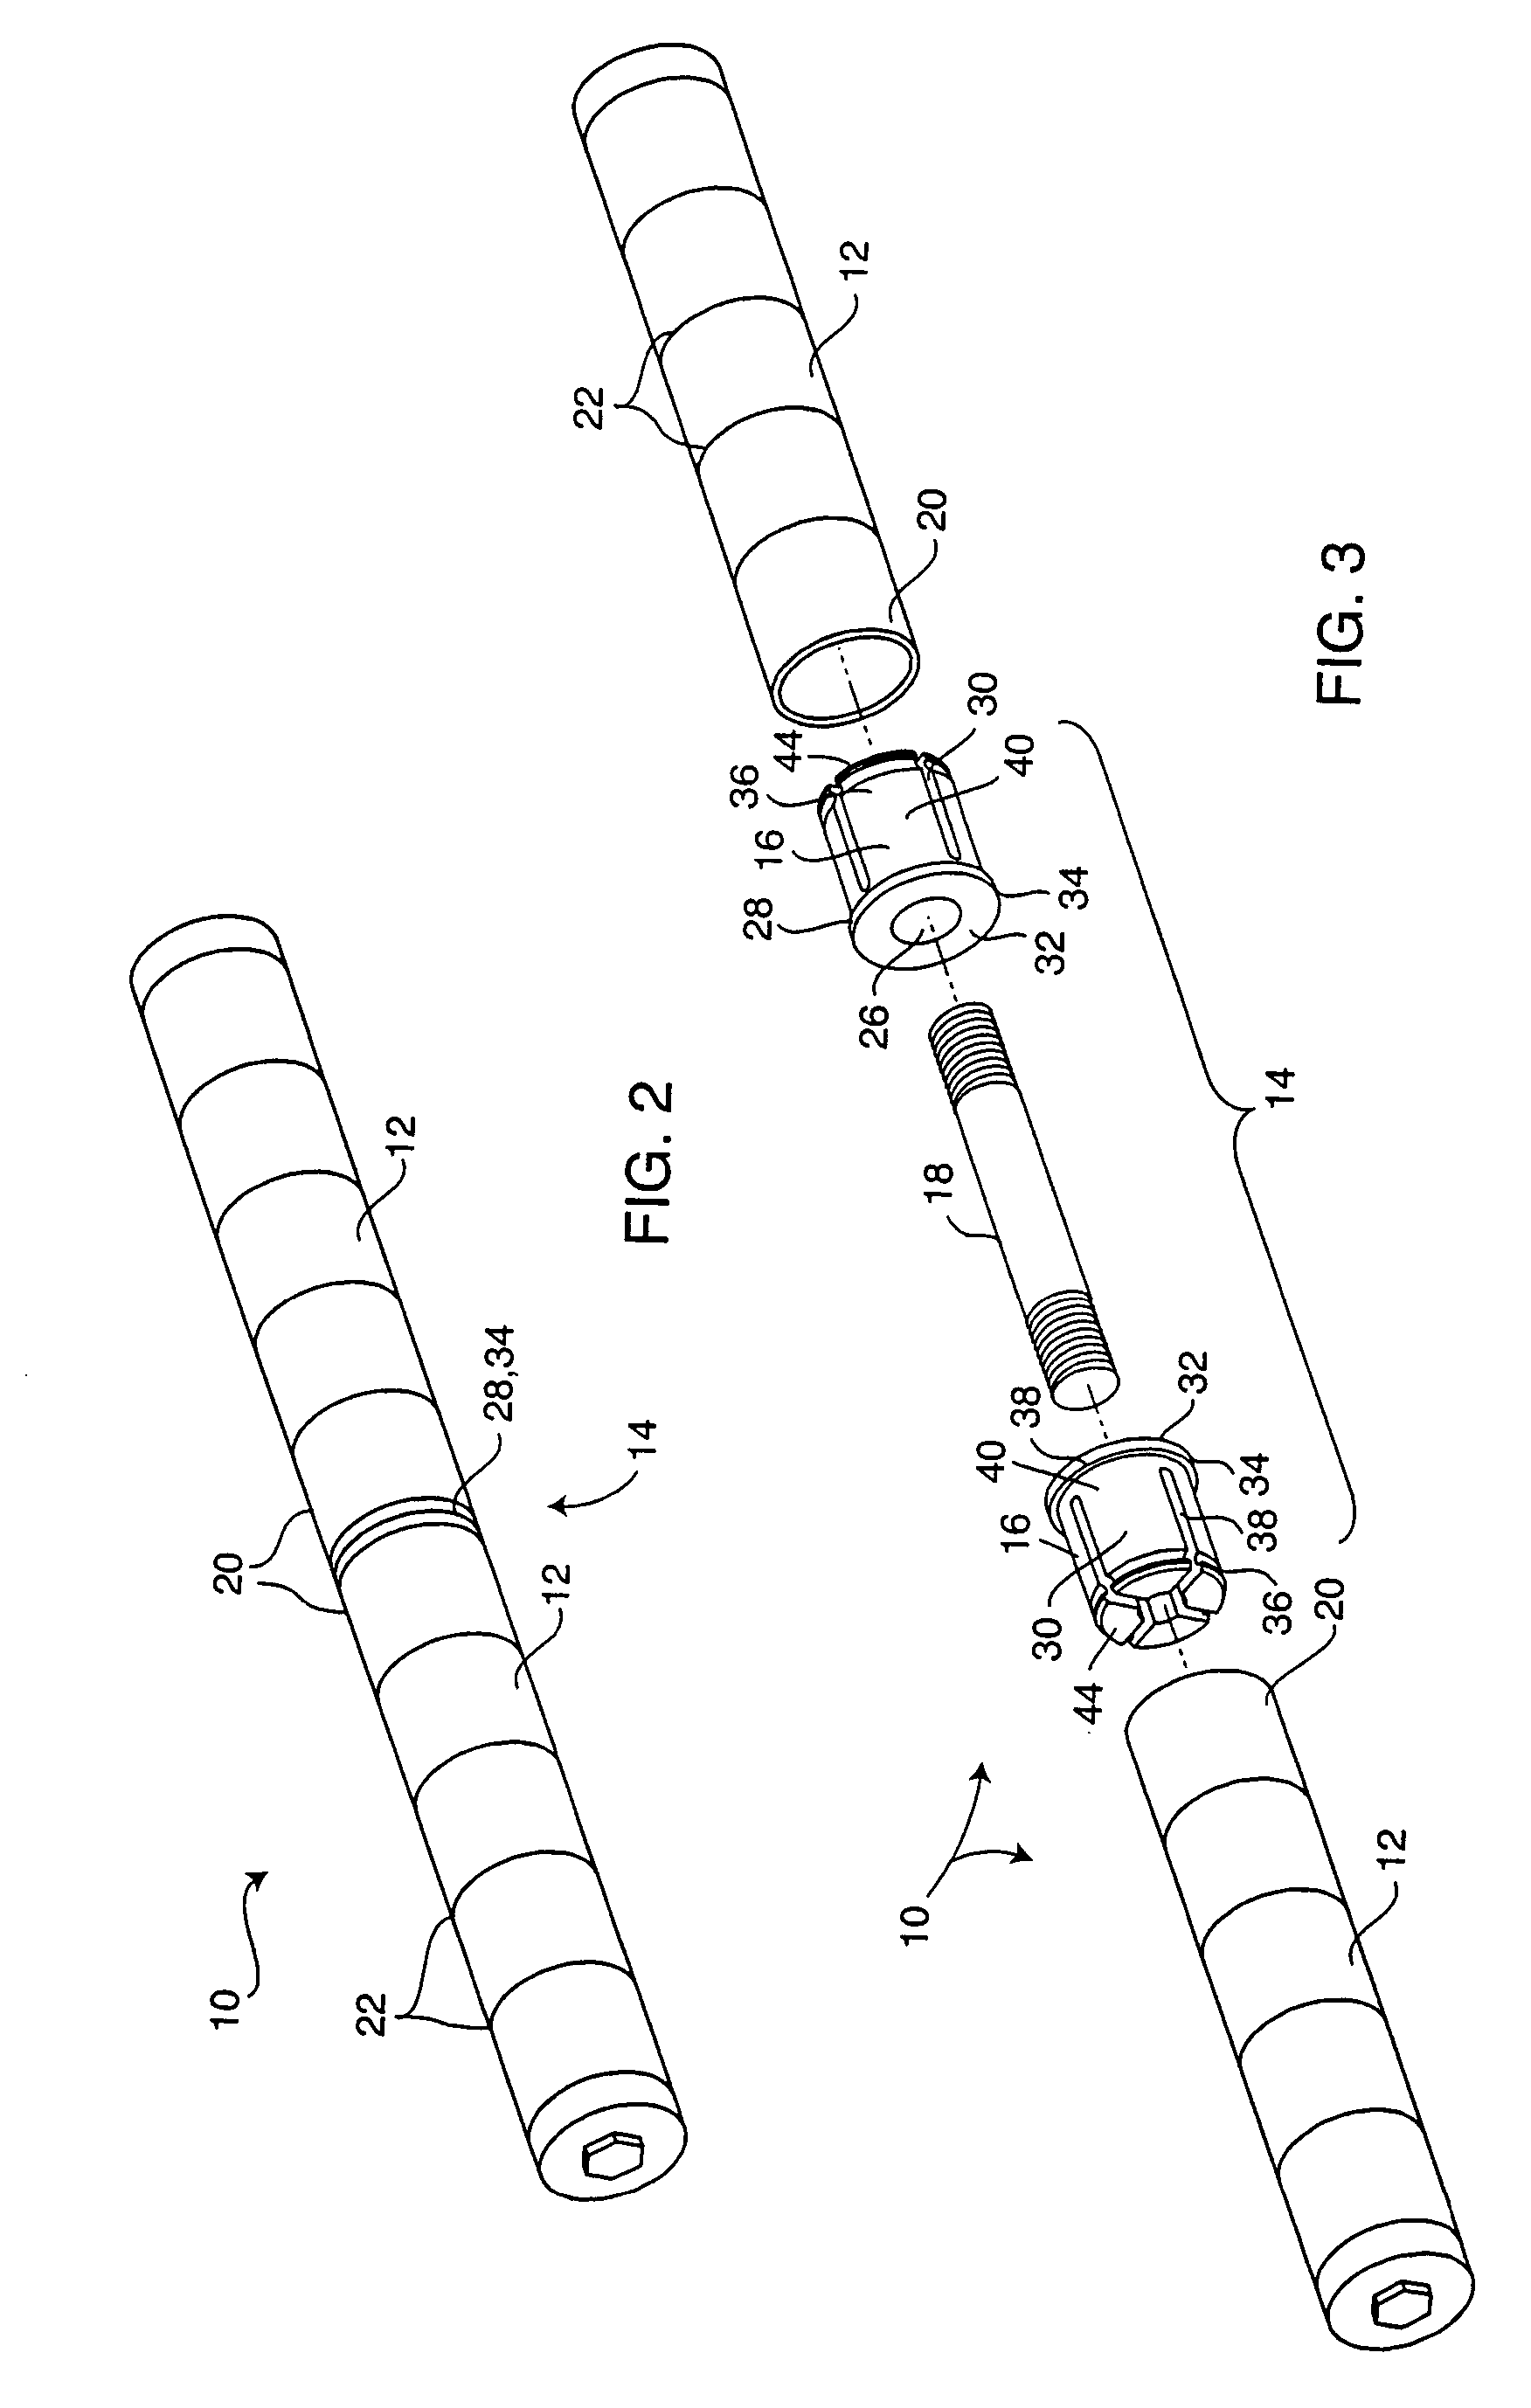 Pole connector assembly and method for racks and shelving